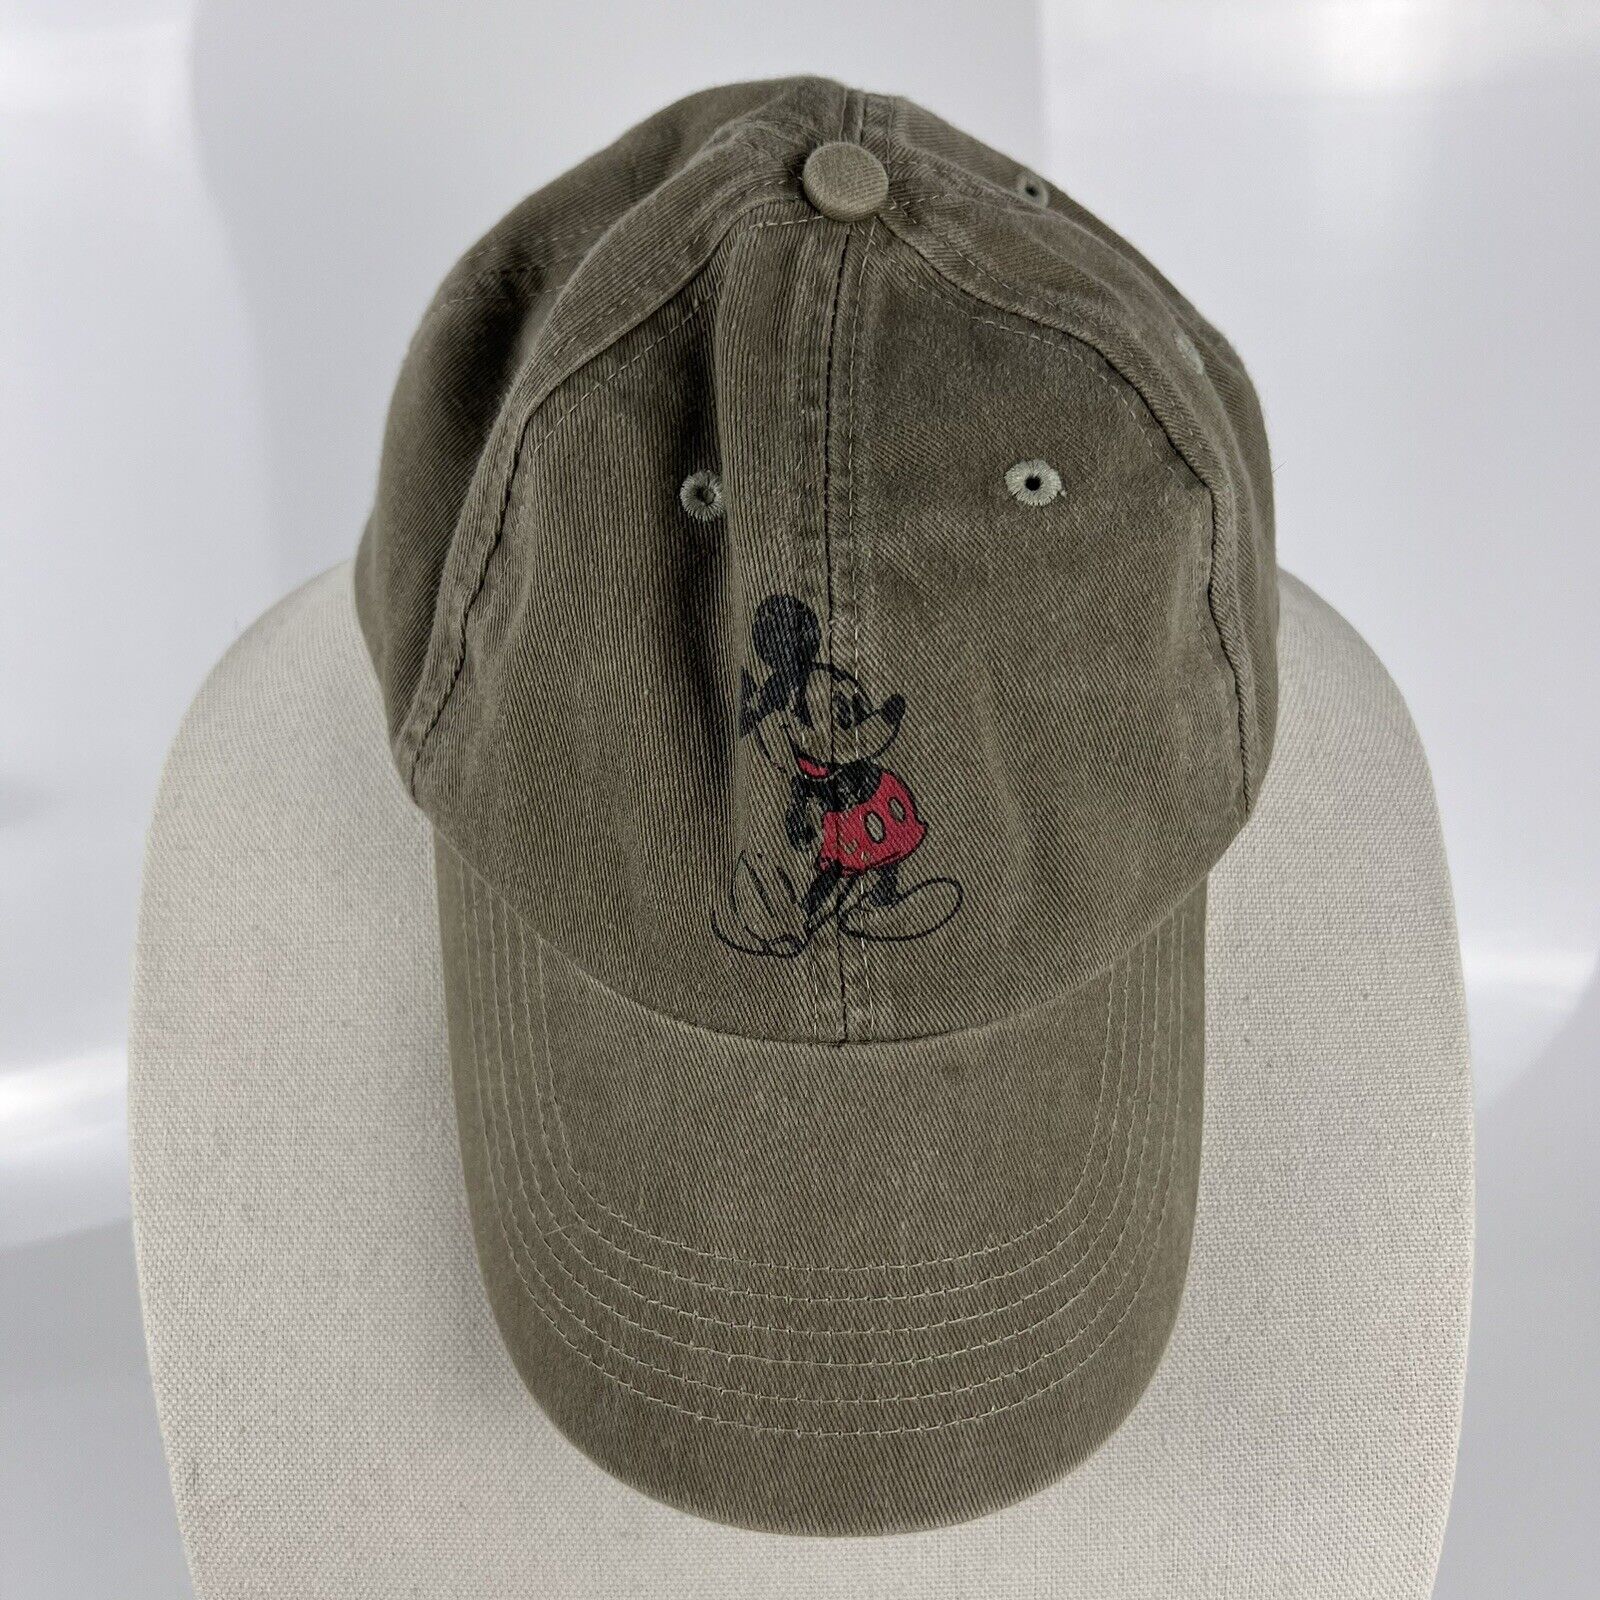 Vintage Disney parks Mickey Mouse Baseball Cap  Olive Green Distressed Look